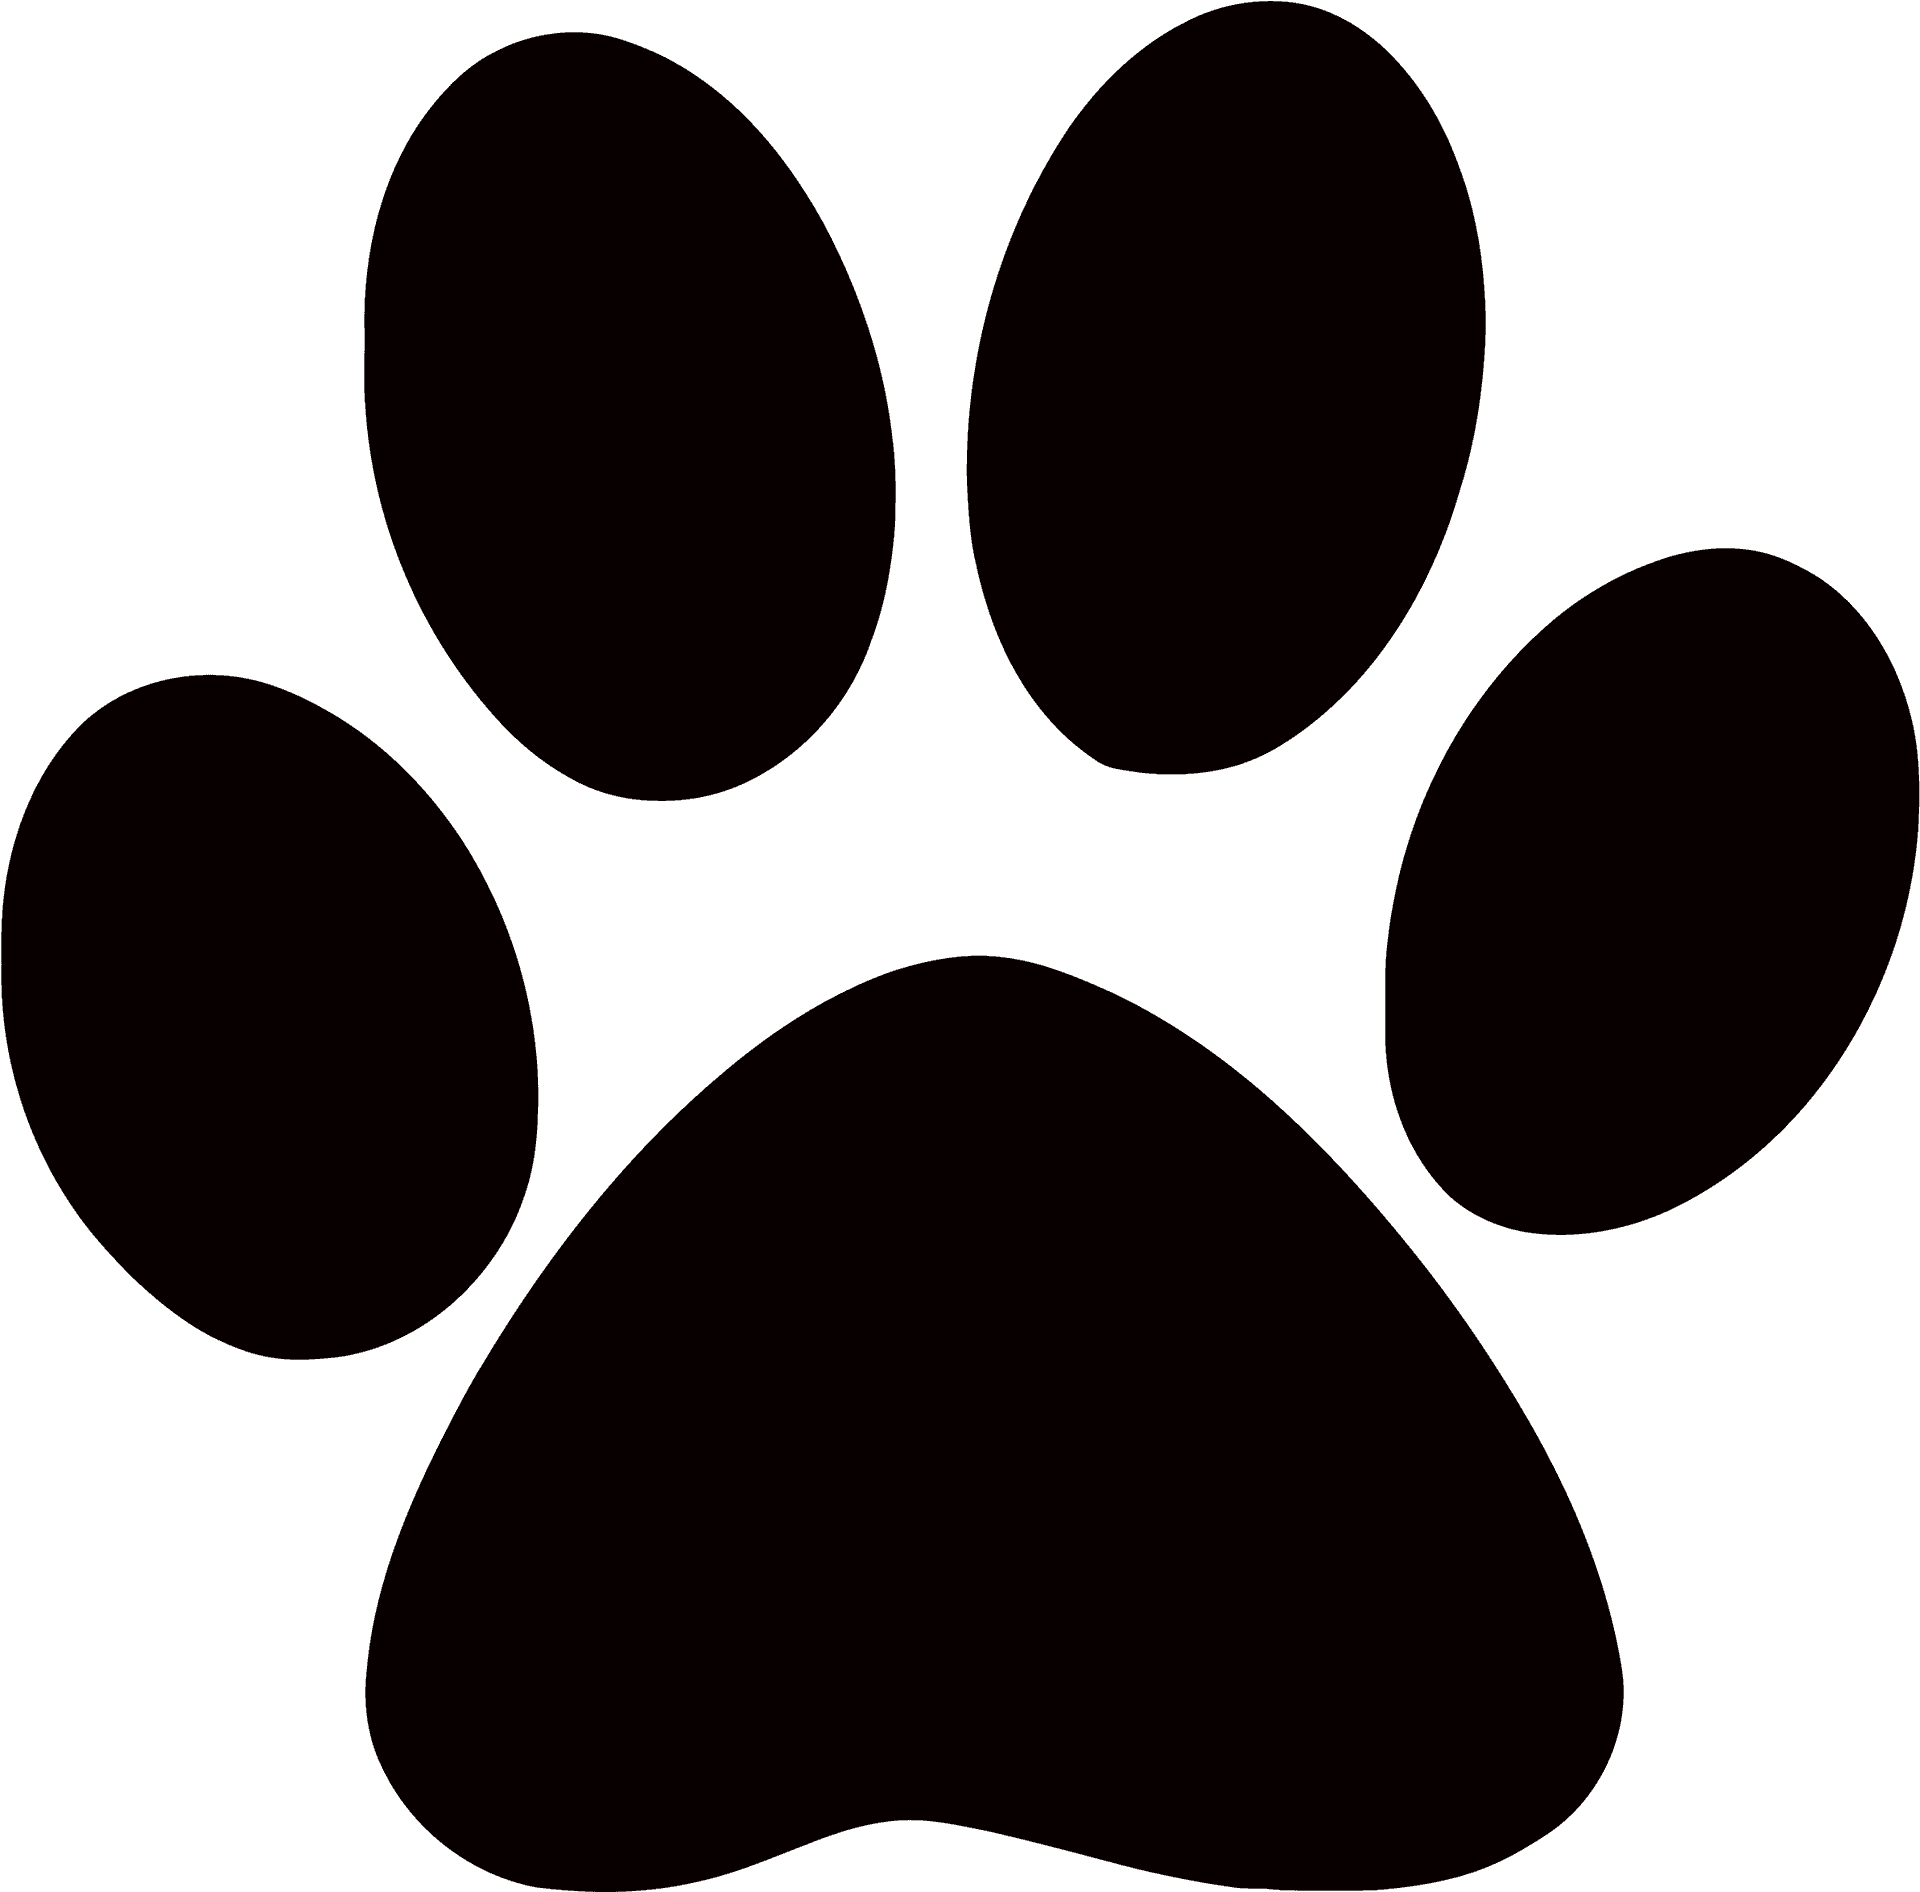 Paw Print Silhouette Graphic PNG